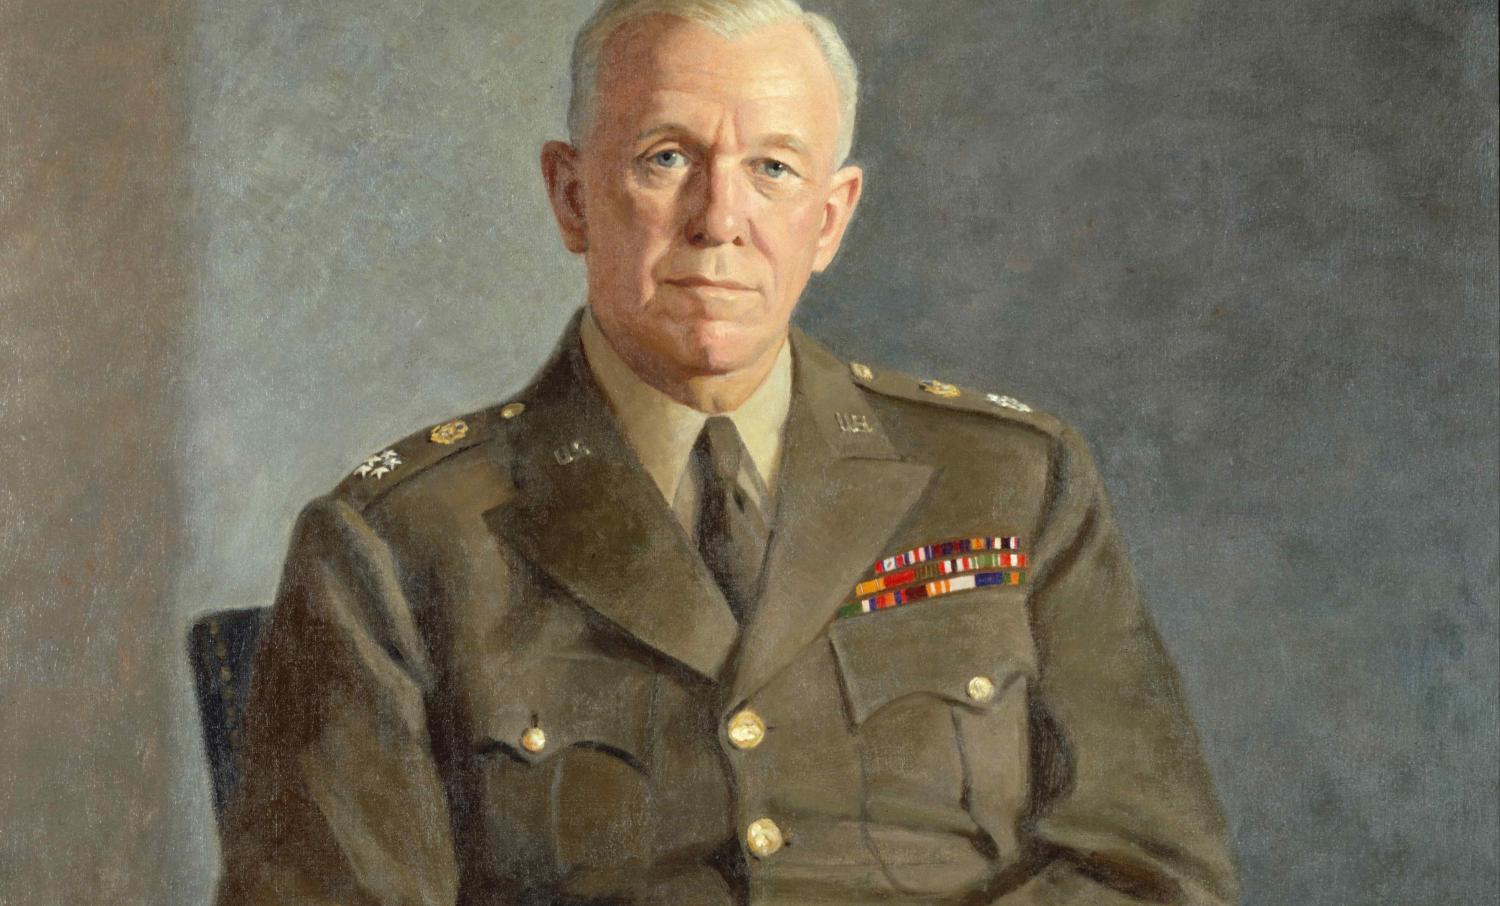 General George Marshall, as painted by Thomas Edgar Stephens circa 1949 (Photo: Wikimedia/National Portrait Gallery)